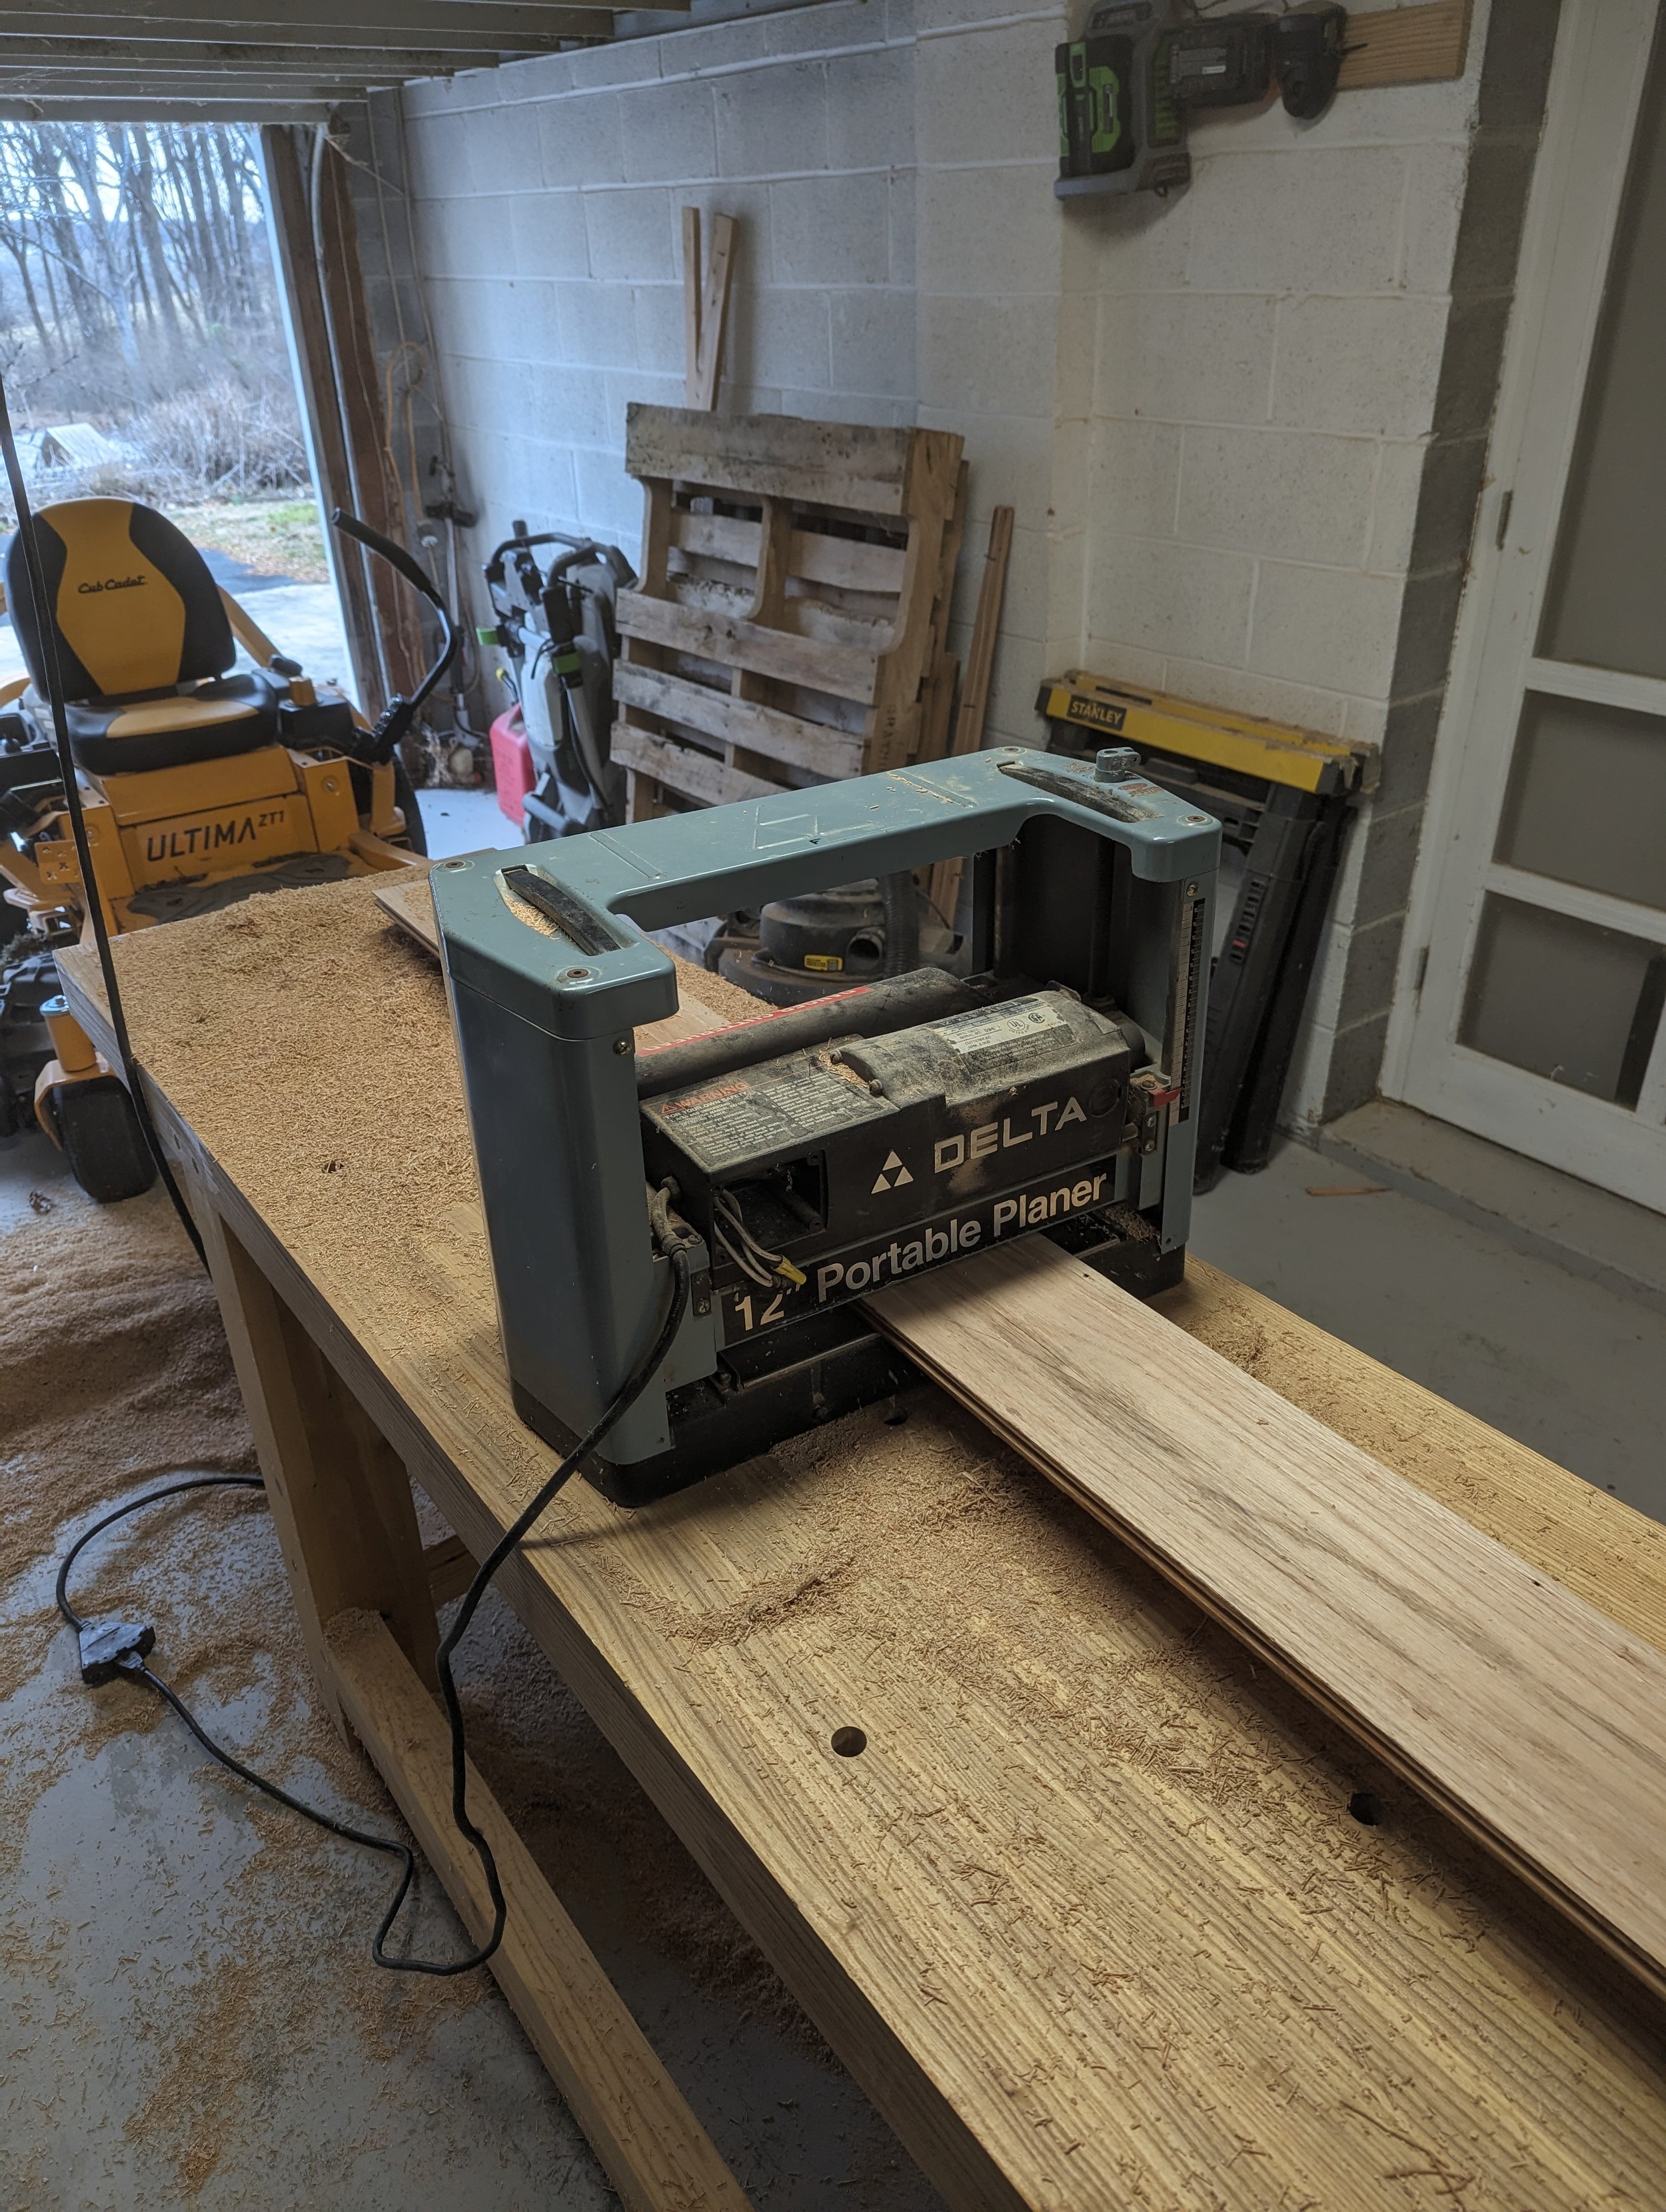  Once all of the boards were put through the jointer and had a flat surface, they were then put through the planer. This process removed the grooves from the bottoms of the boards and made sure that each board was the same thickness. 